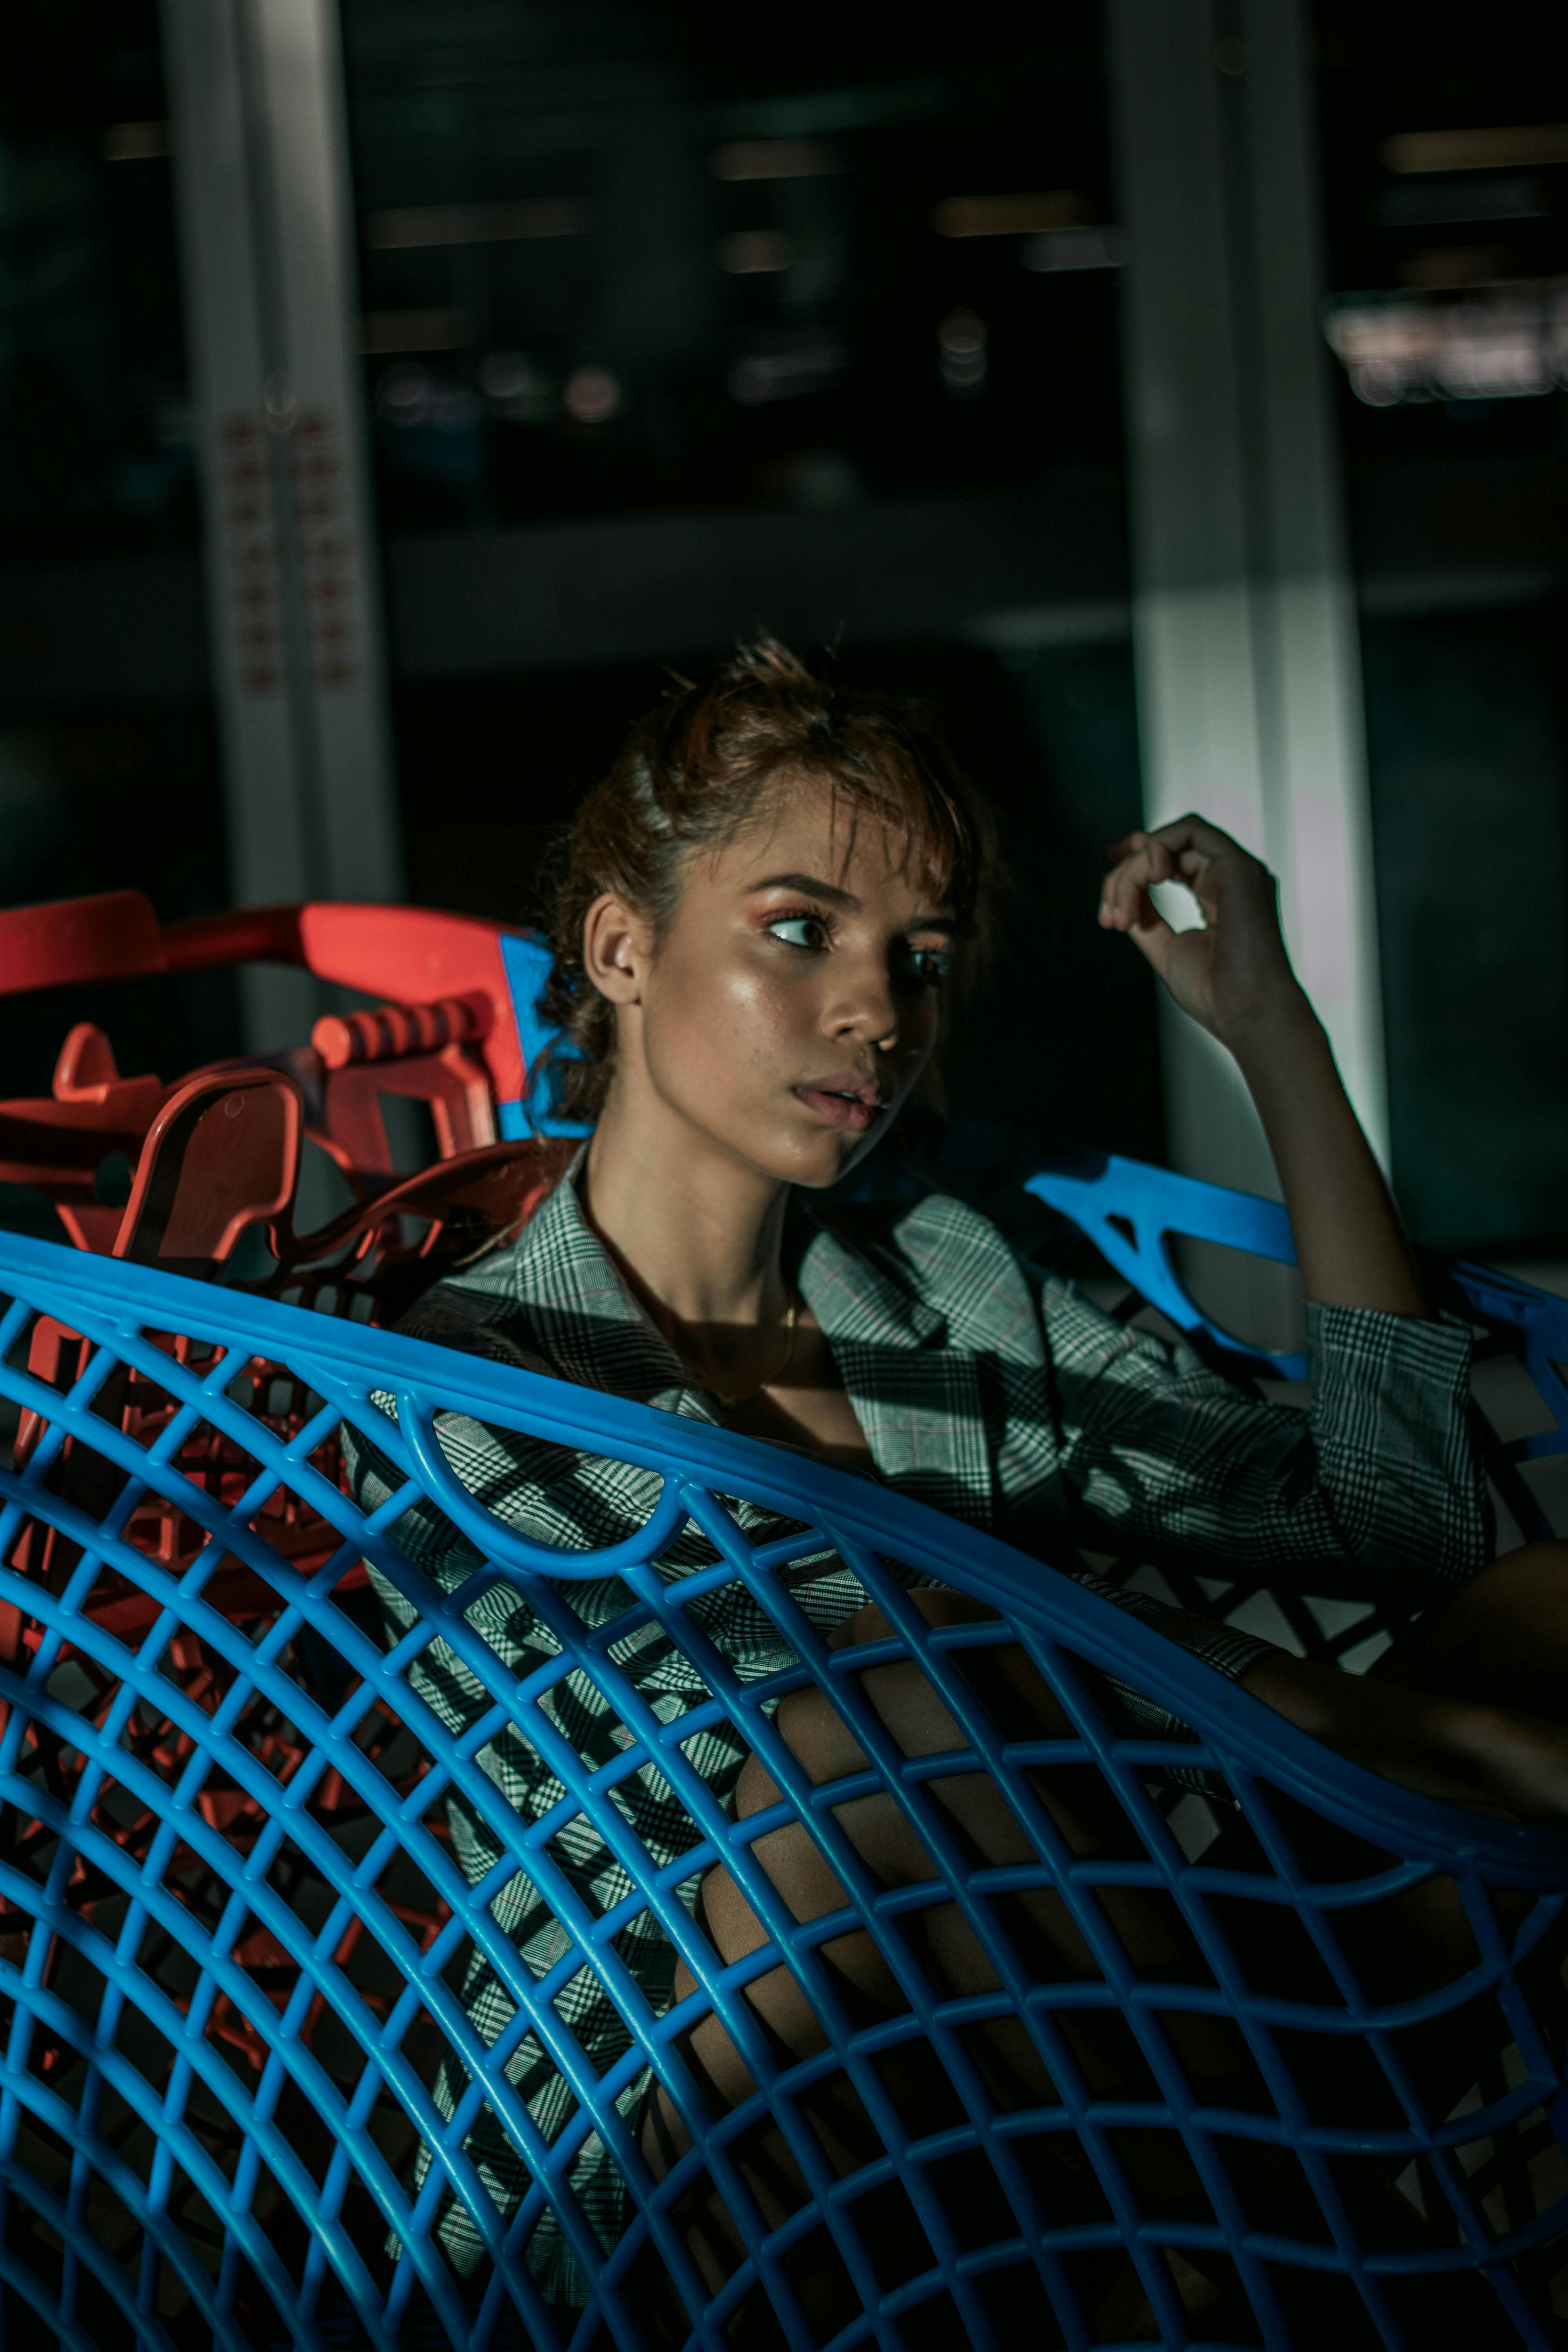 A young woman in deep thoughts sitting in aa supermarket cart. | Source: Pexels